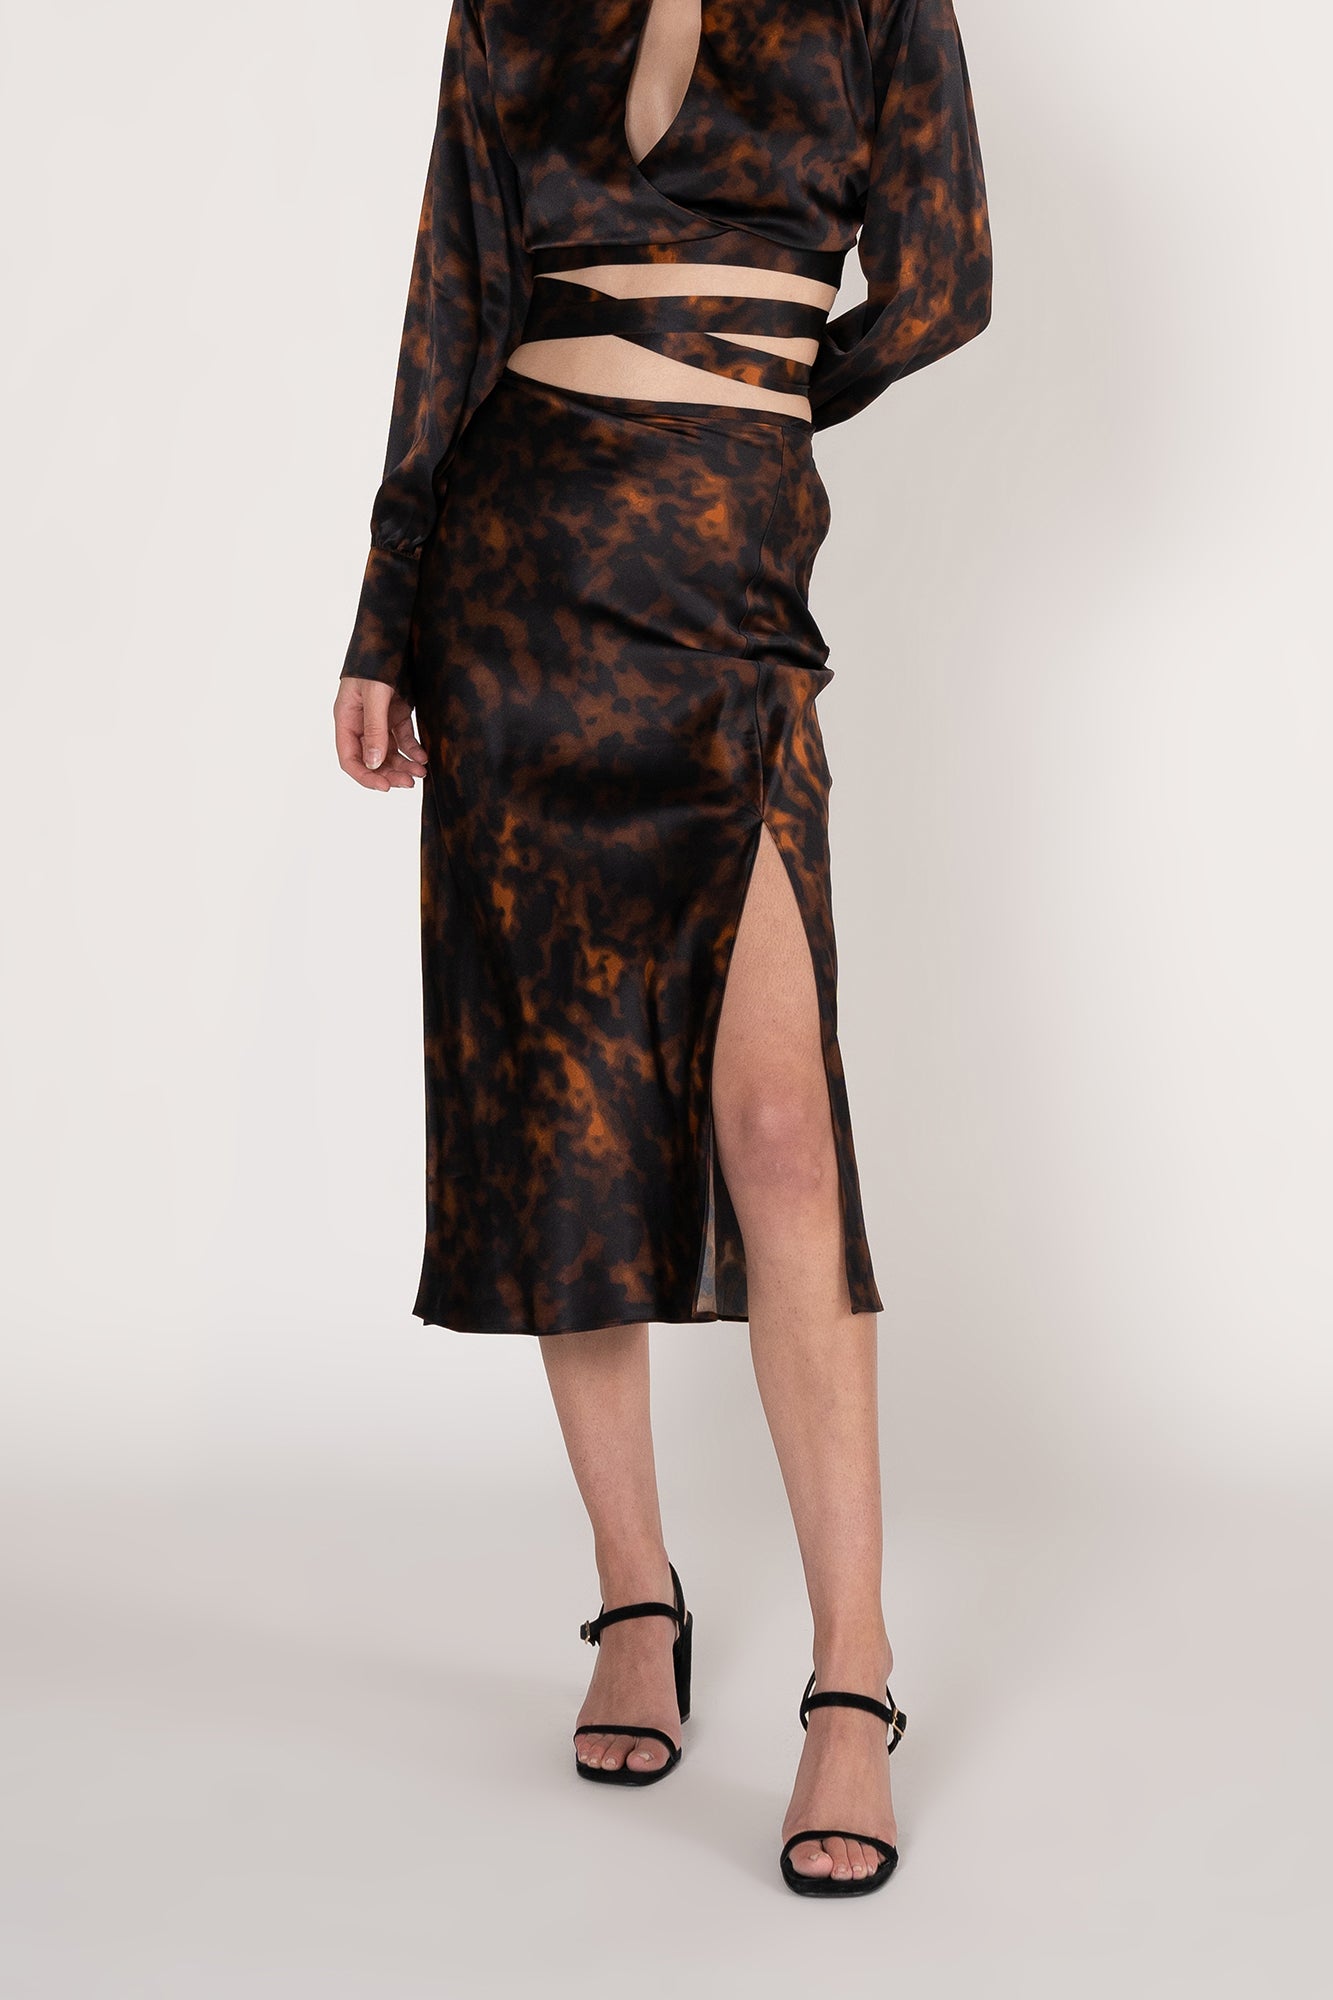 GINIA Thea Slim Line Skirt in Ember